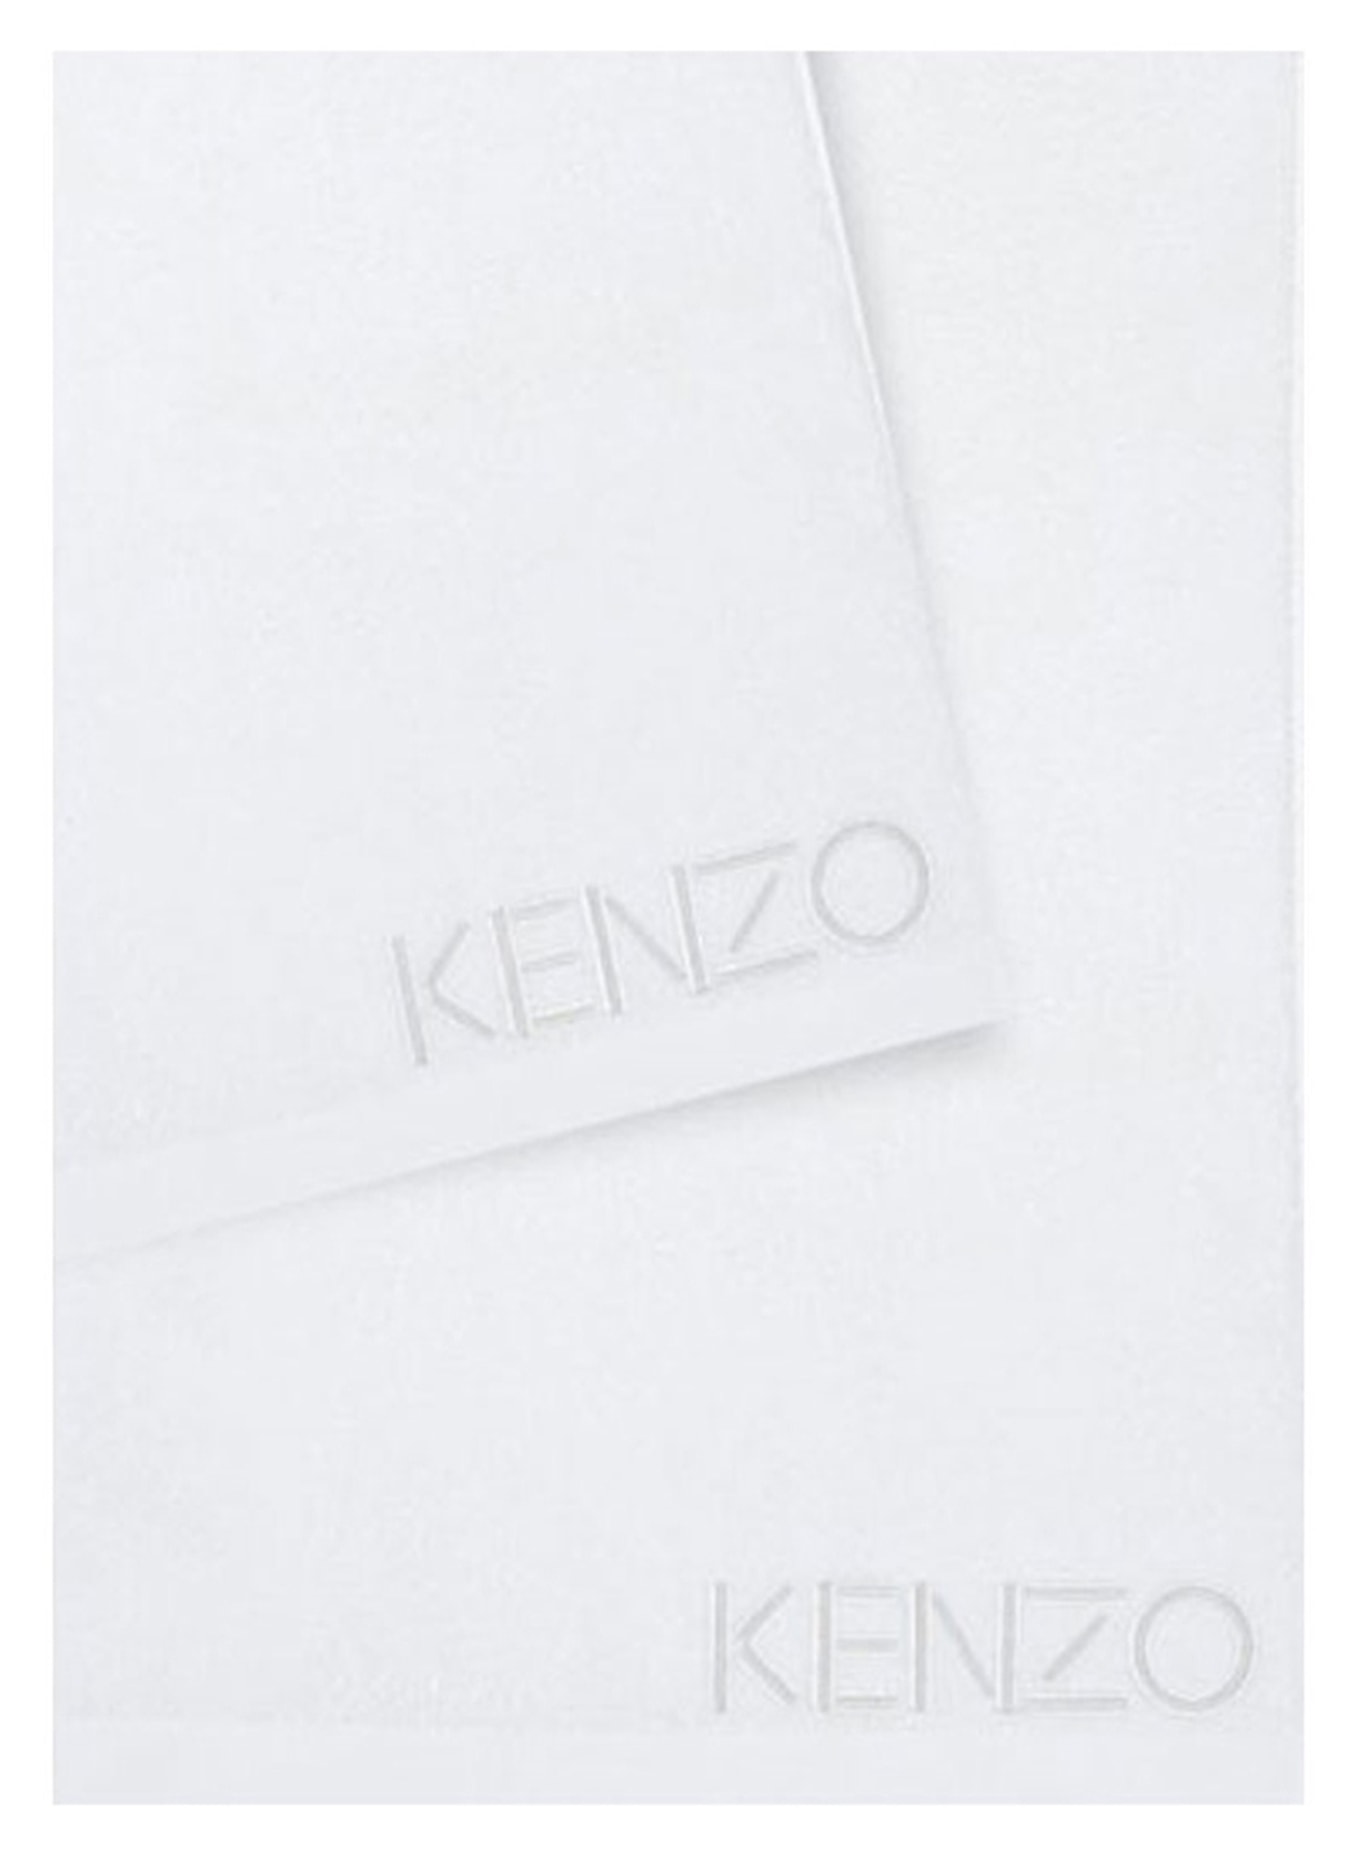 KENZO HOME Handtuch ICONIC, Farbe: WEISS (Bild 15)